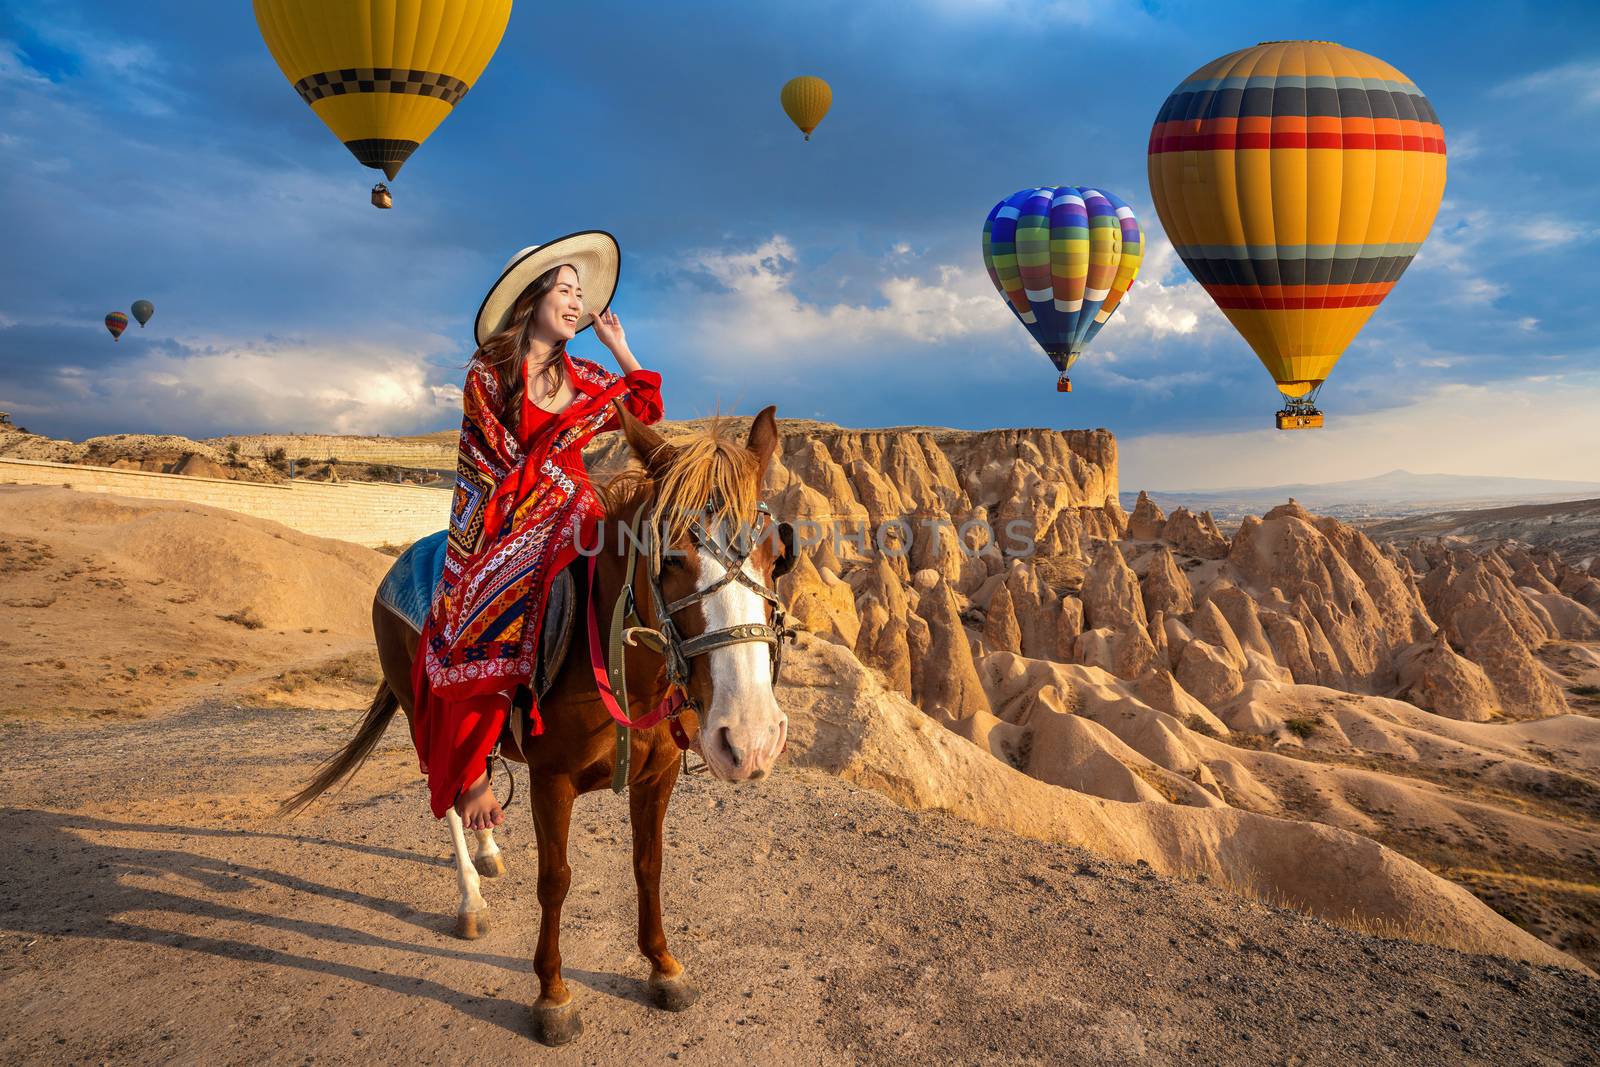 Tourists enjoy ride horses and looking to balloons in Cappadocia, Turkey by gutarphotoghaphy